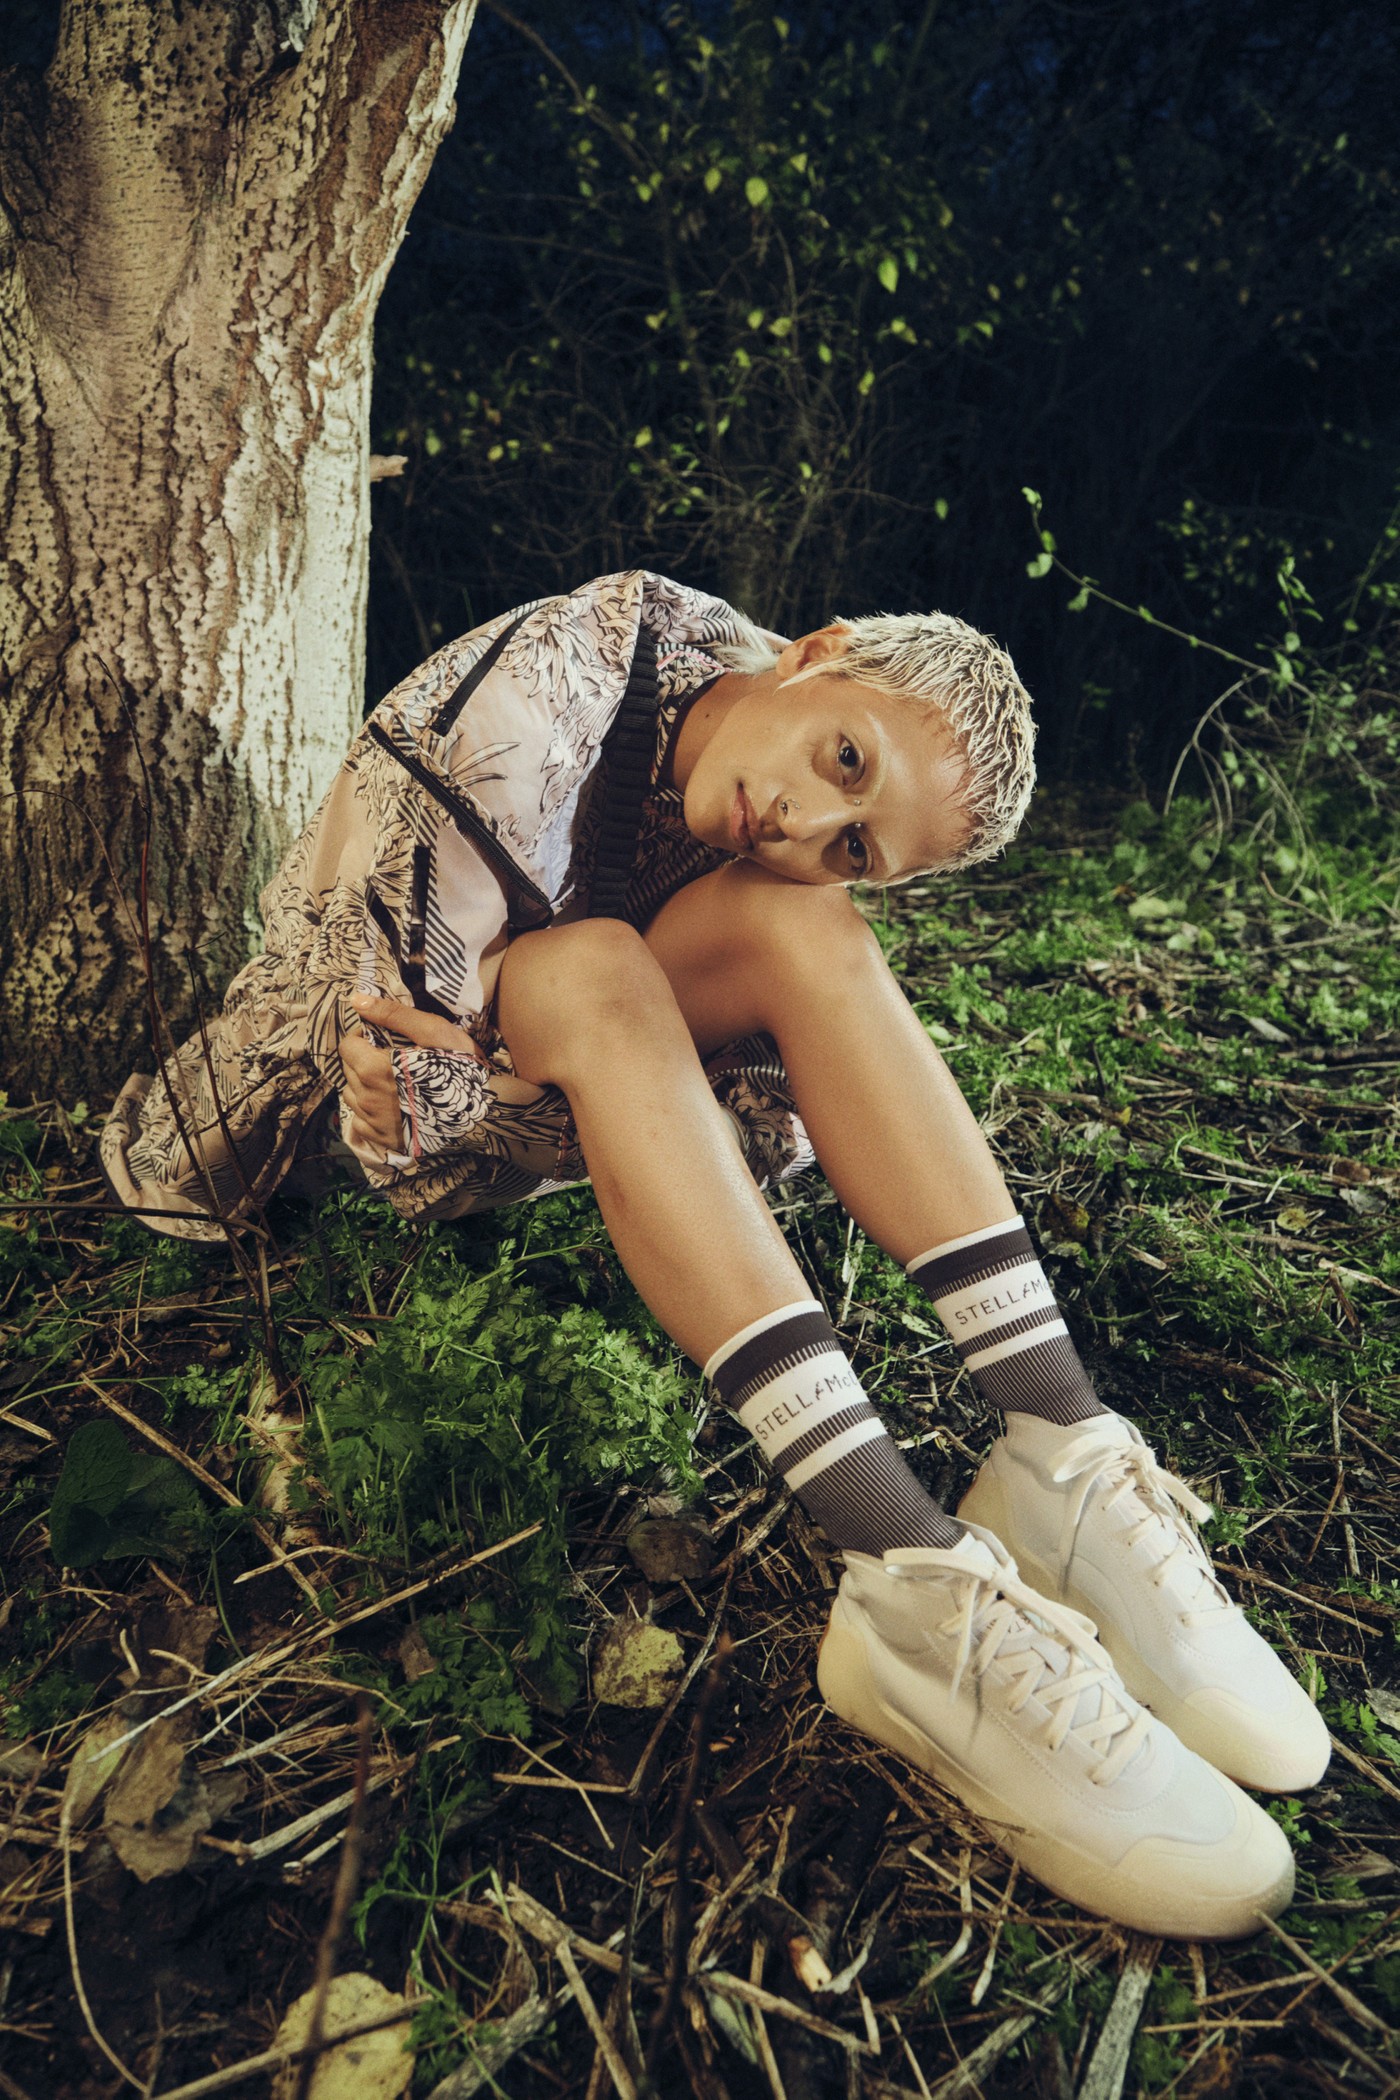 Adidas by Stella McCartney Unveils Most Sustainable Collection Yet